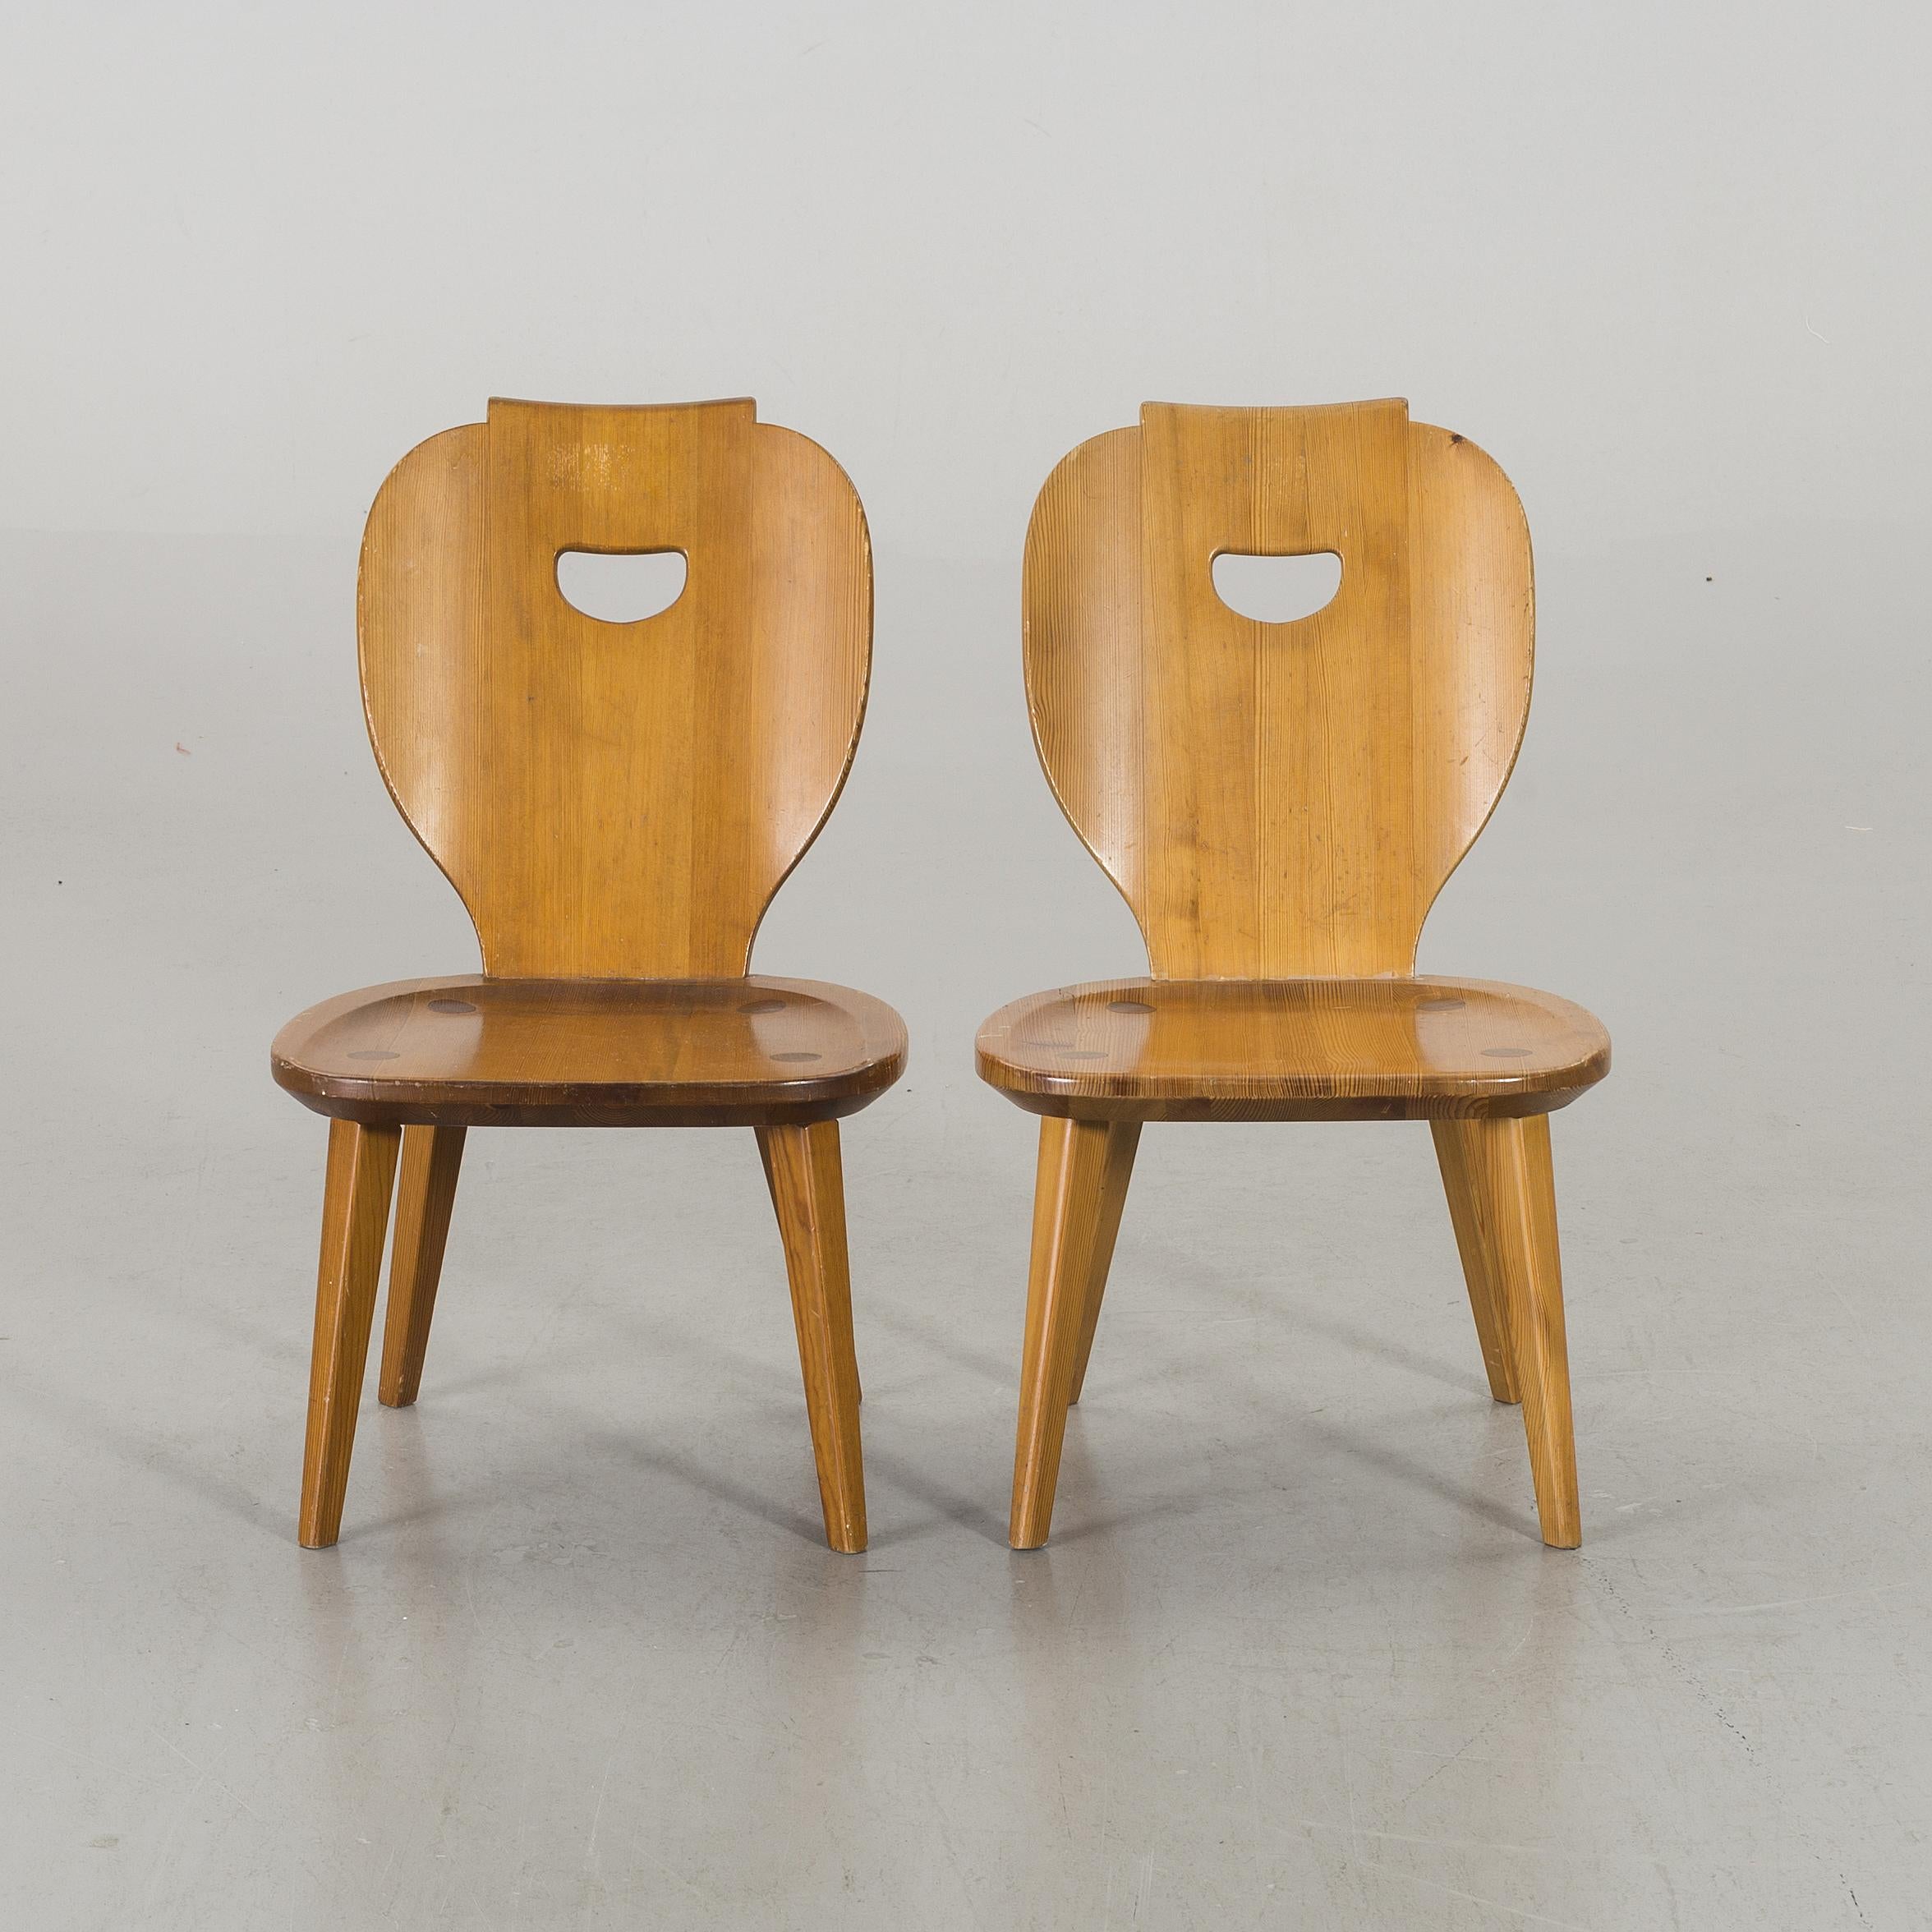 2 chairs, Carl Malmsten, Sweden, 1953, Produced by Svensk Fur.